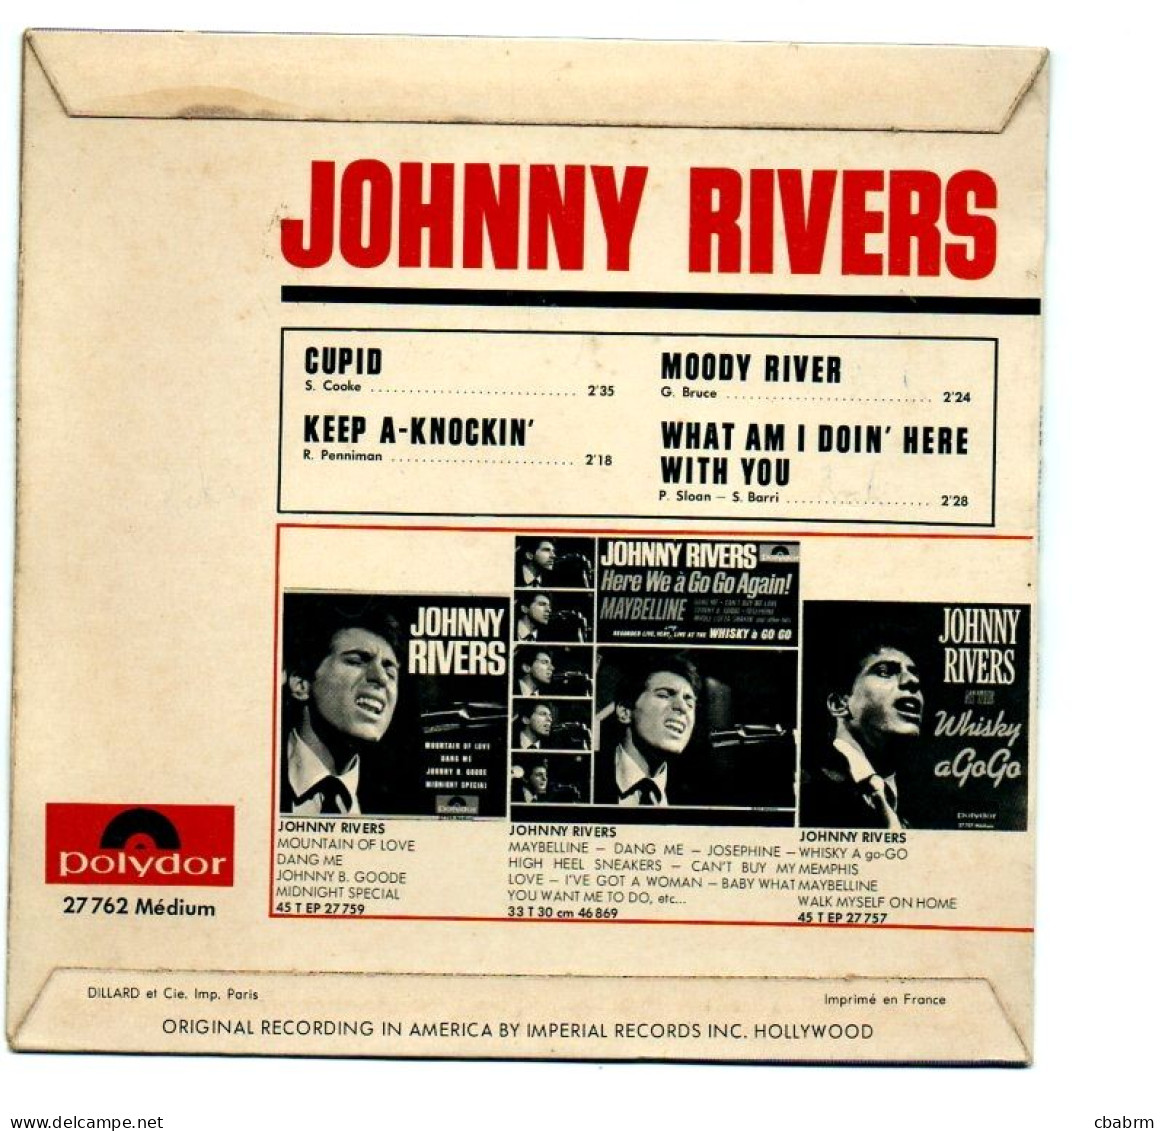 EP 45 TOURS JOHNNY RIVERS CUPID FRANCE POLYDOR 27762 - 7" - Rock